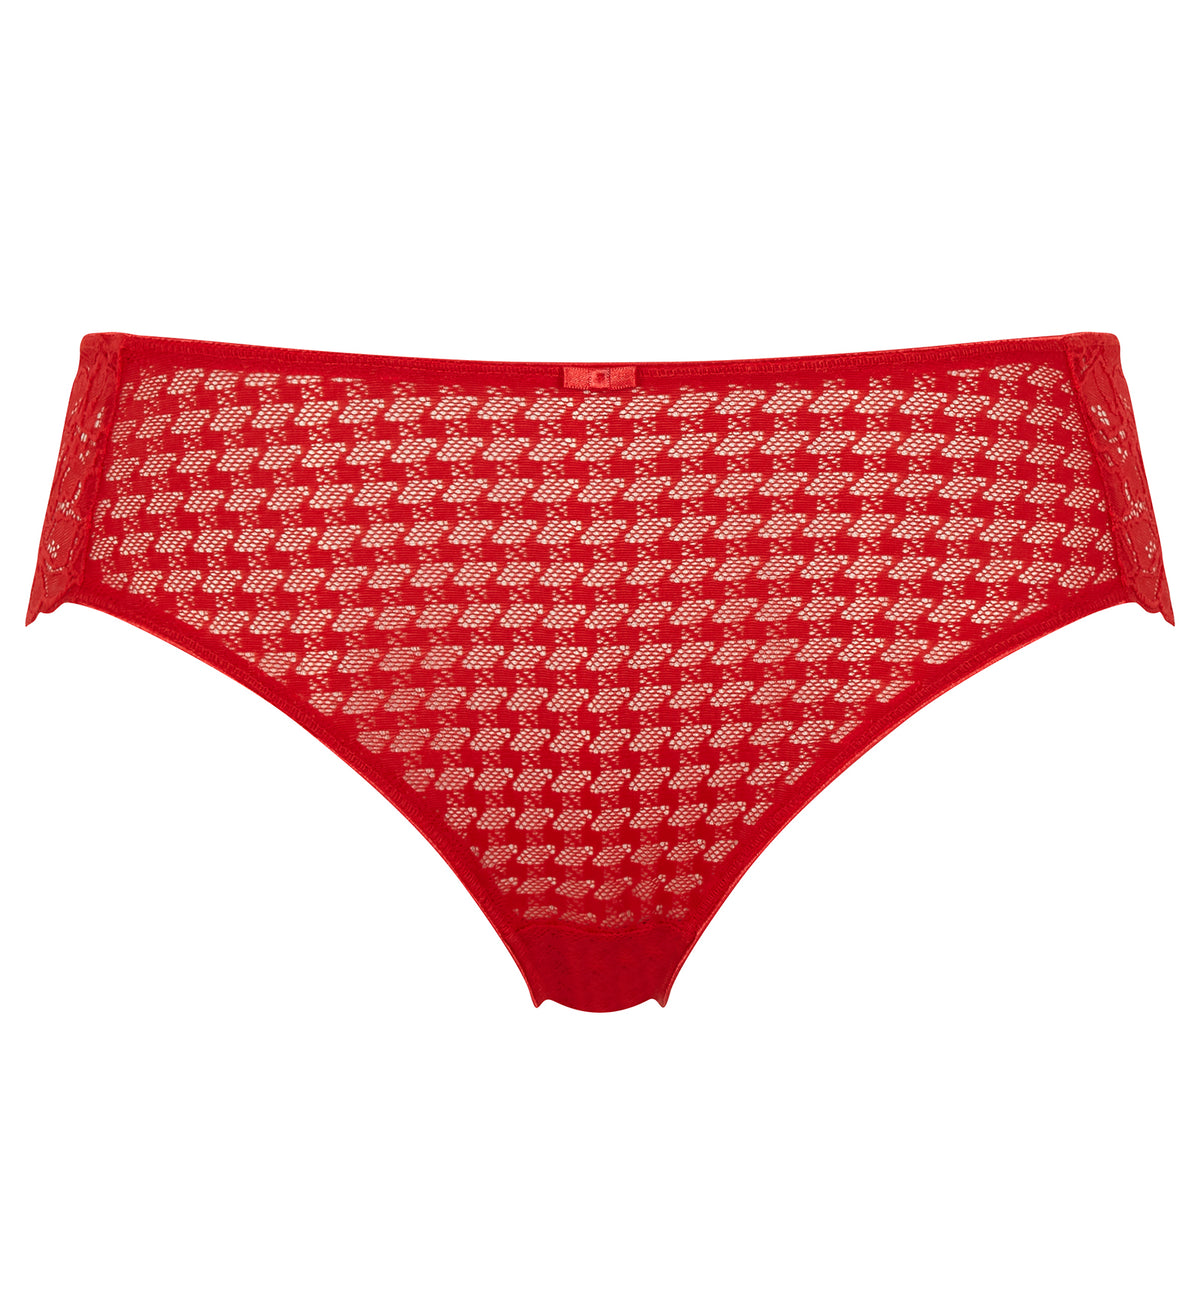 Panache Envy Matching Brief (7282),Small,Poppy Red - Poppy Red,Small